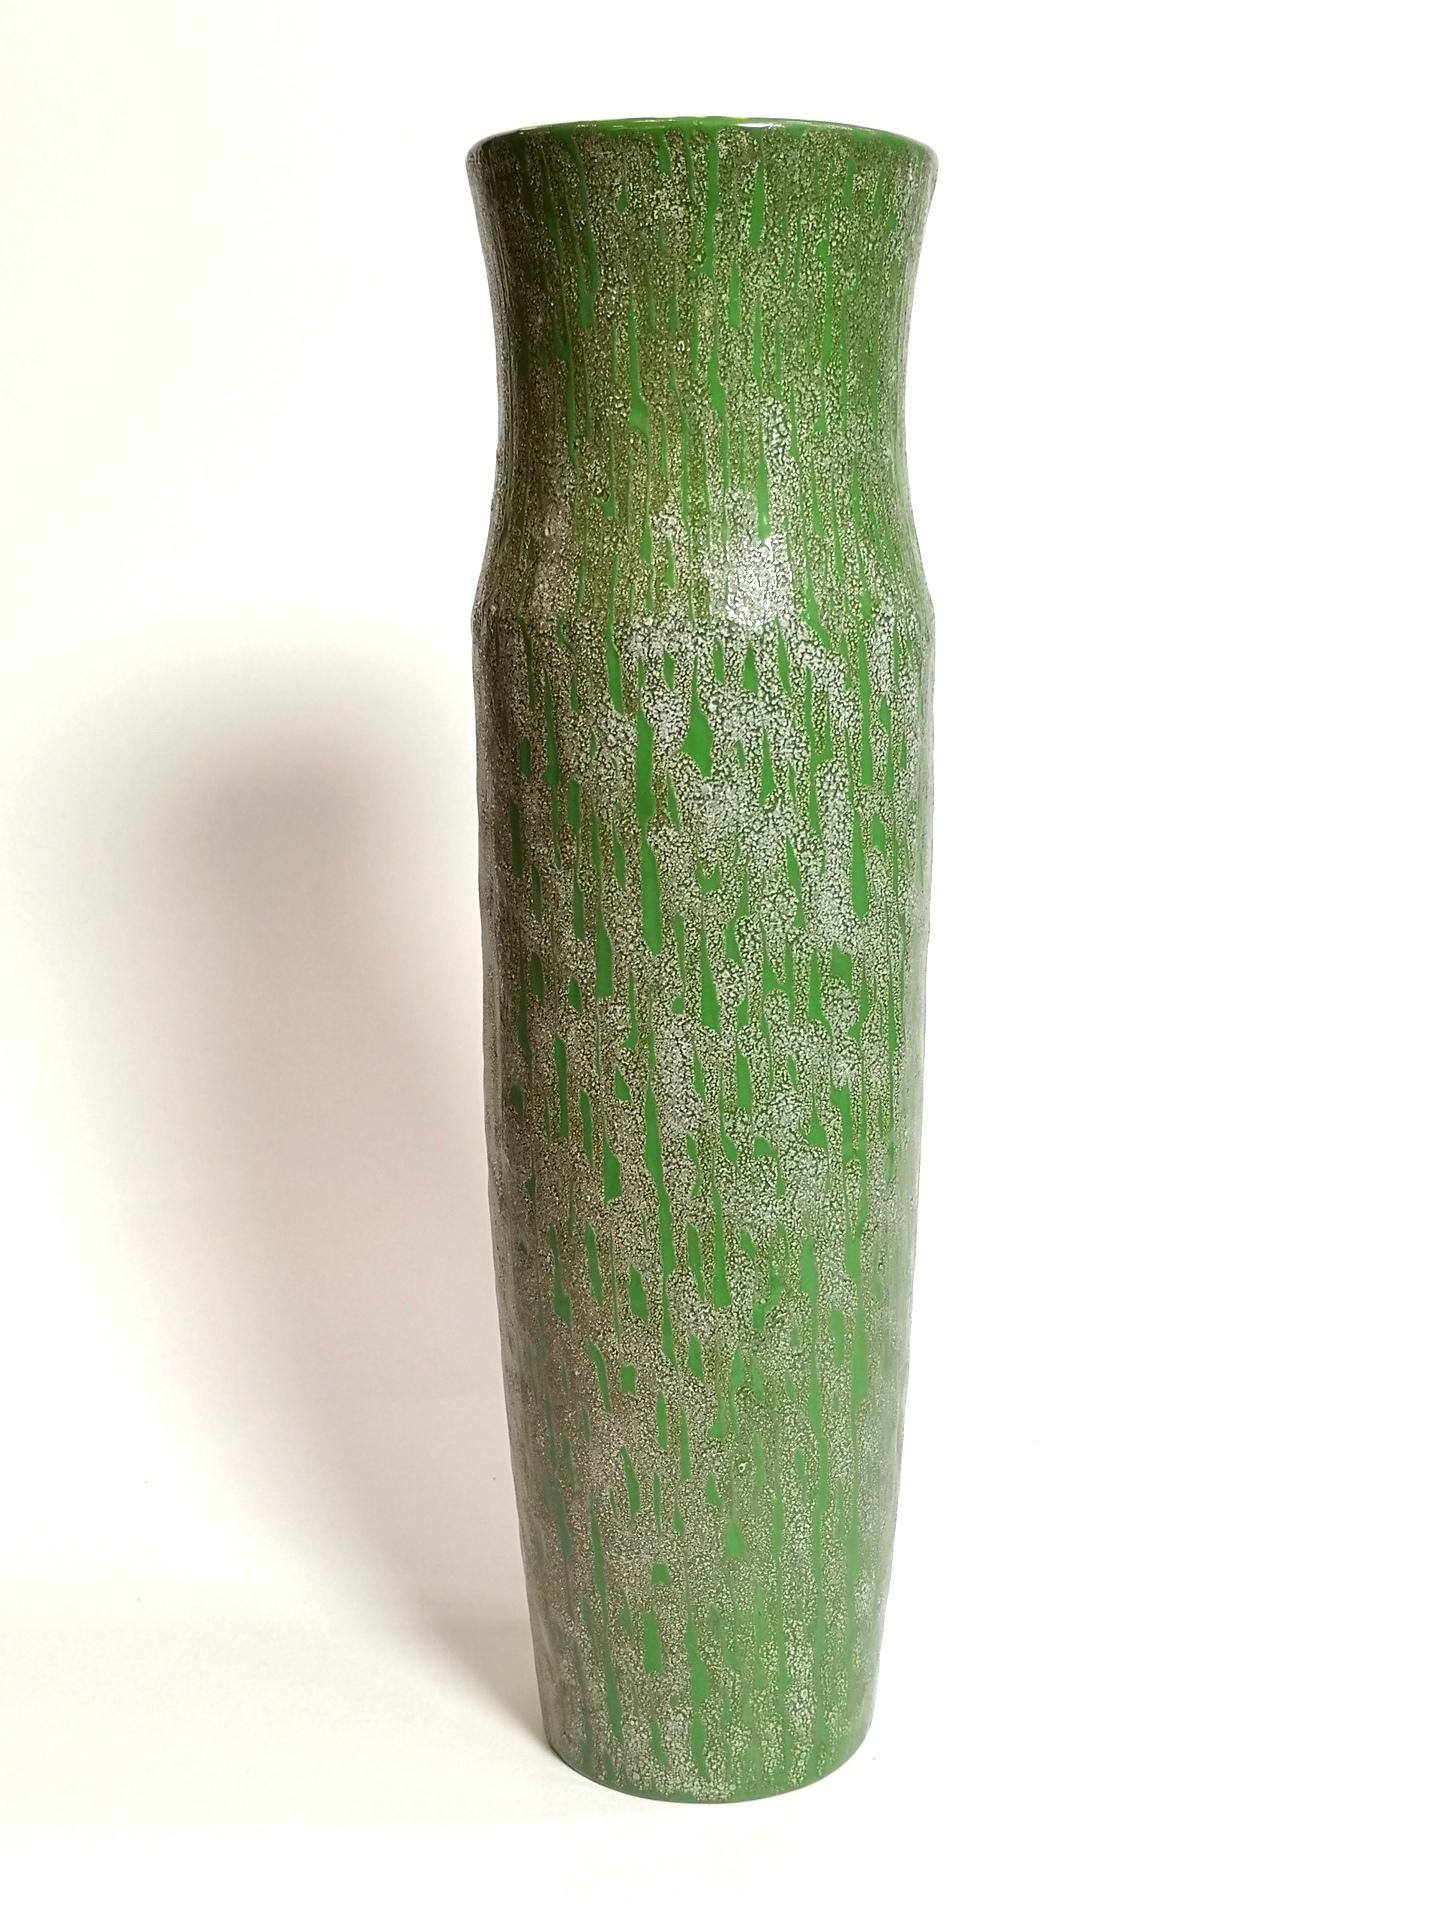 This vintage ceramic vase features an organic cracked pattern on top of the smooth emerald green surface. The vibrant yellow inside adds just enough warmth to its appearance, that begs for spring flowers to occupy this piece from the 1970’s 

This